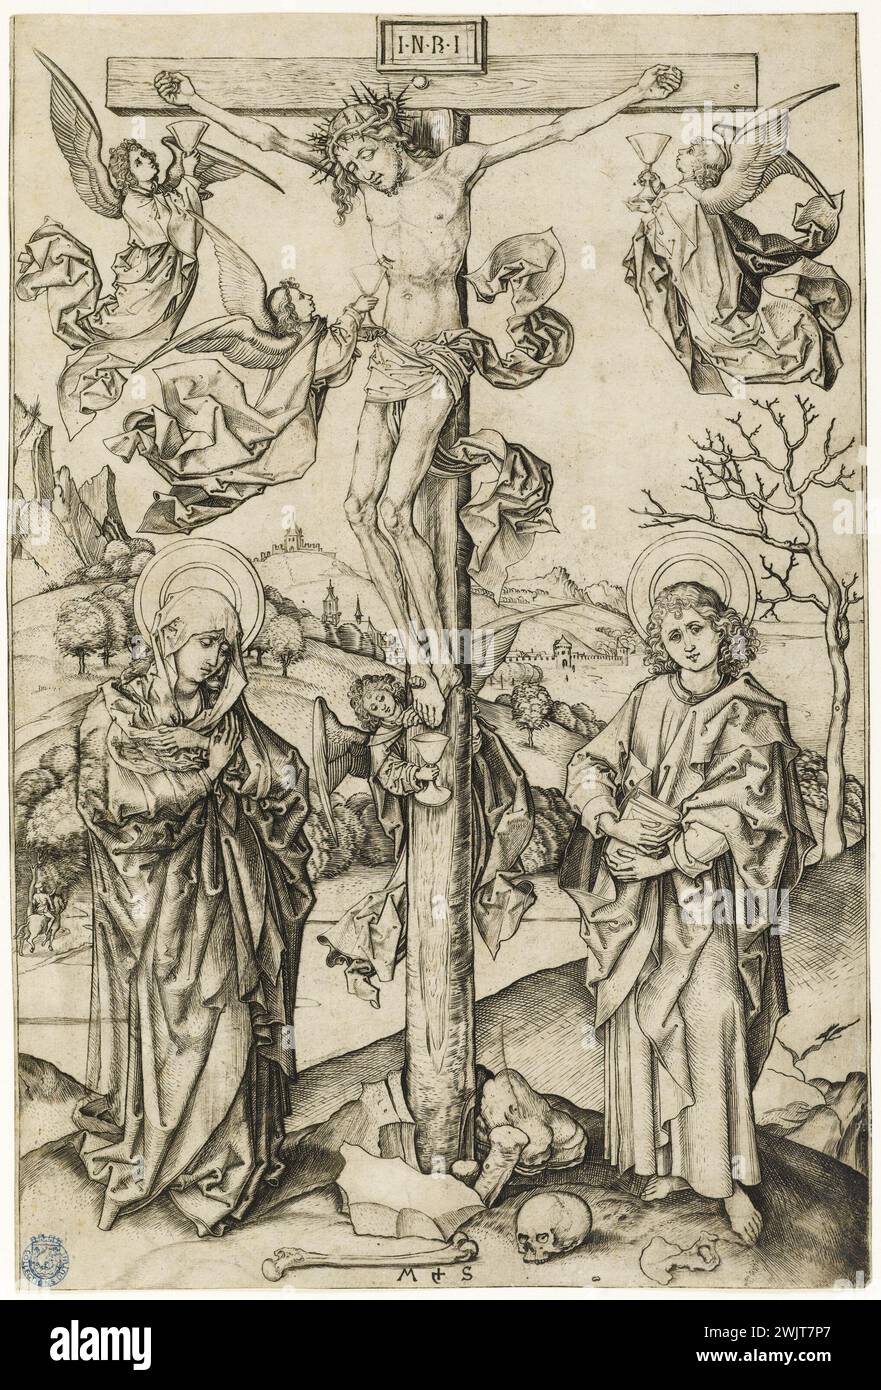 Anonymous. The Crucifixion to the four angels (copy) (Bartsch 25). Engraving (chisel), 1475-1480. Museum of Fine Arts of the City of Paris, Petit Palais. 76856-14 Art medieval, Christianity, engraving in chisel, Christian iconography, religious iconography, Middle Ages, New Testament, biblical character, 15th XV 15th 15th 15th century, engraving Stock Photo